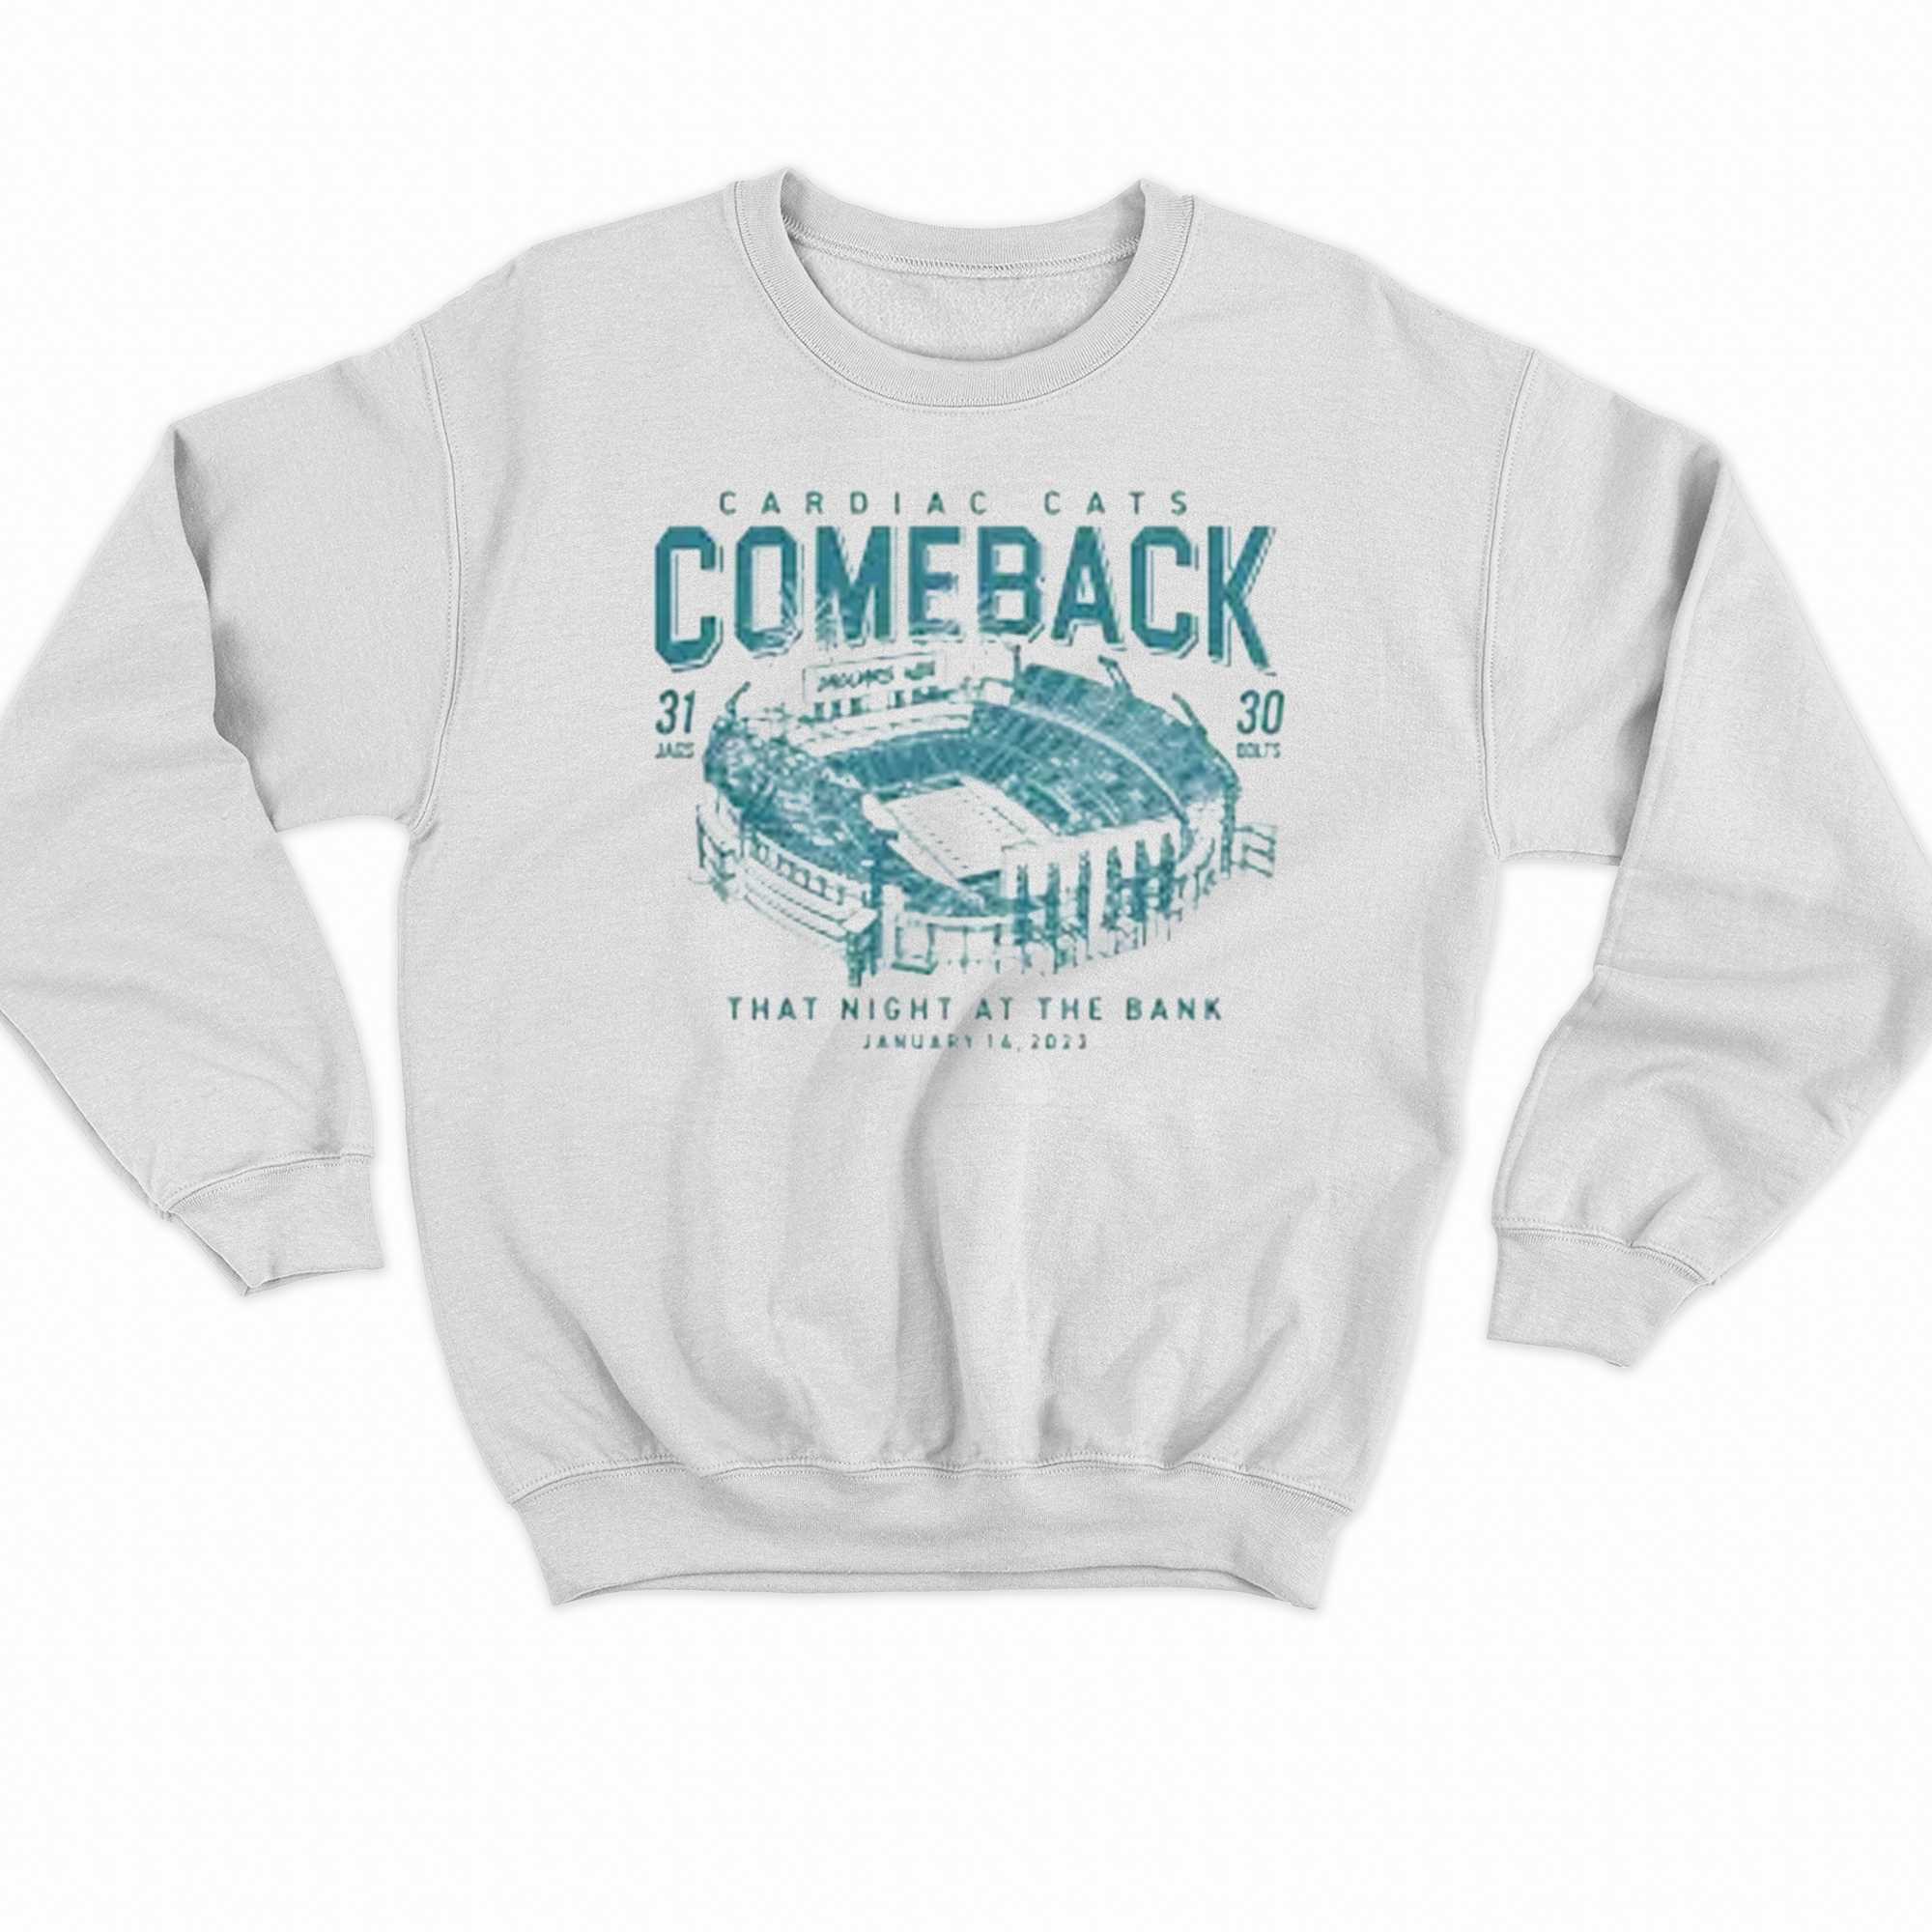 The Cardiac Cats Comback Shirt - That Night At The Bank 